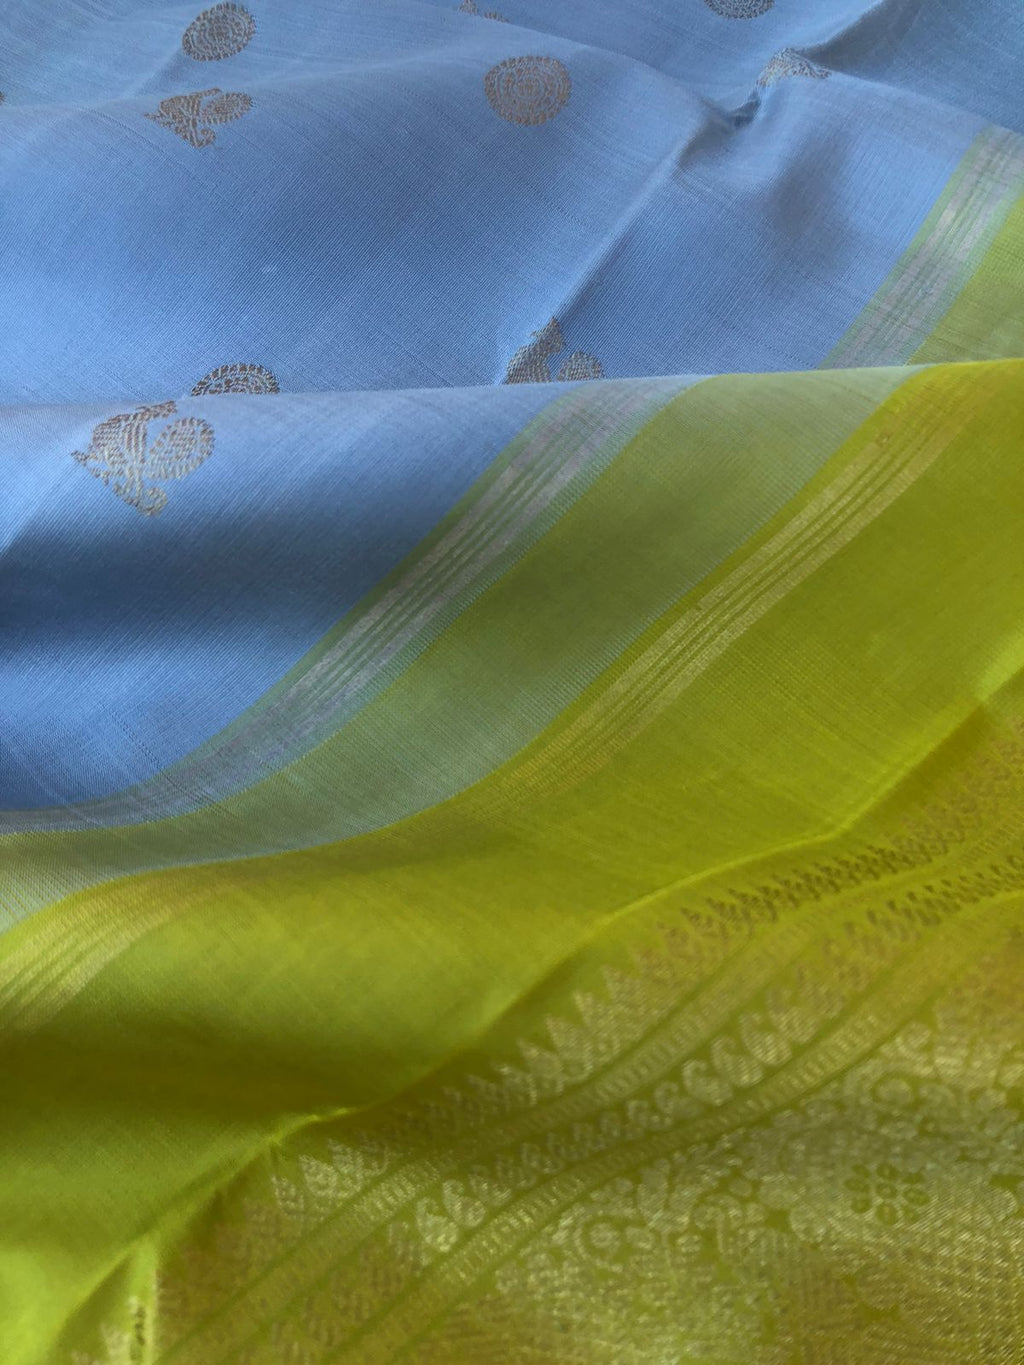 Meenakshi Kalayanam - Authentic Korvai Kanchivarams - such a stunning unusual bluish grey and olive green